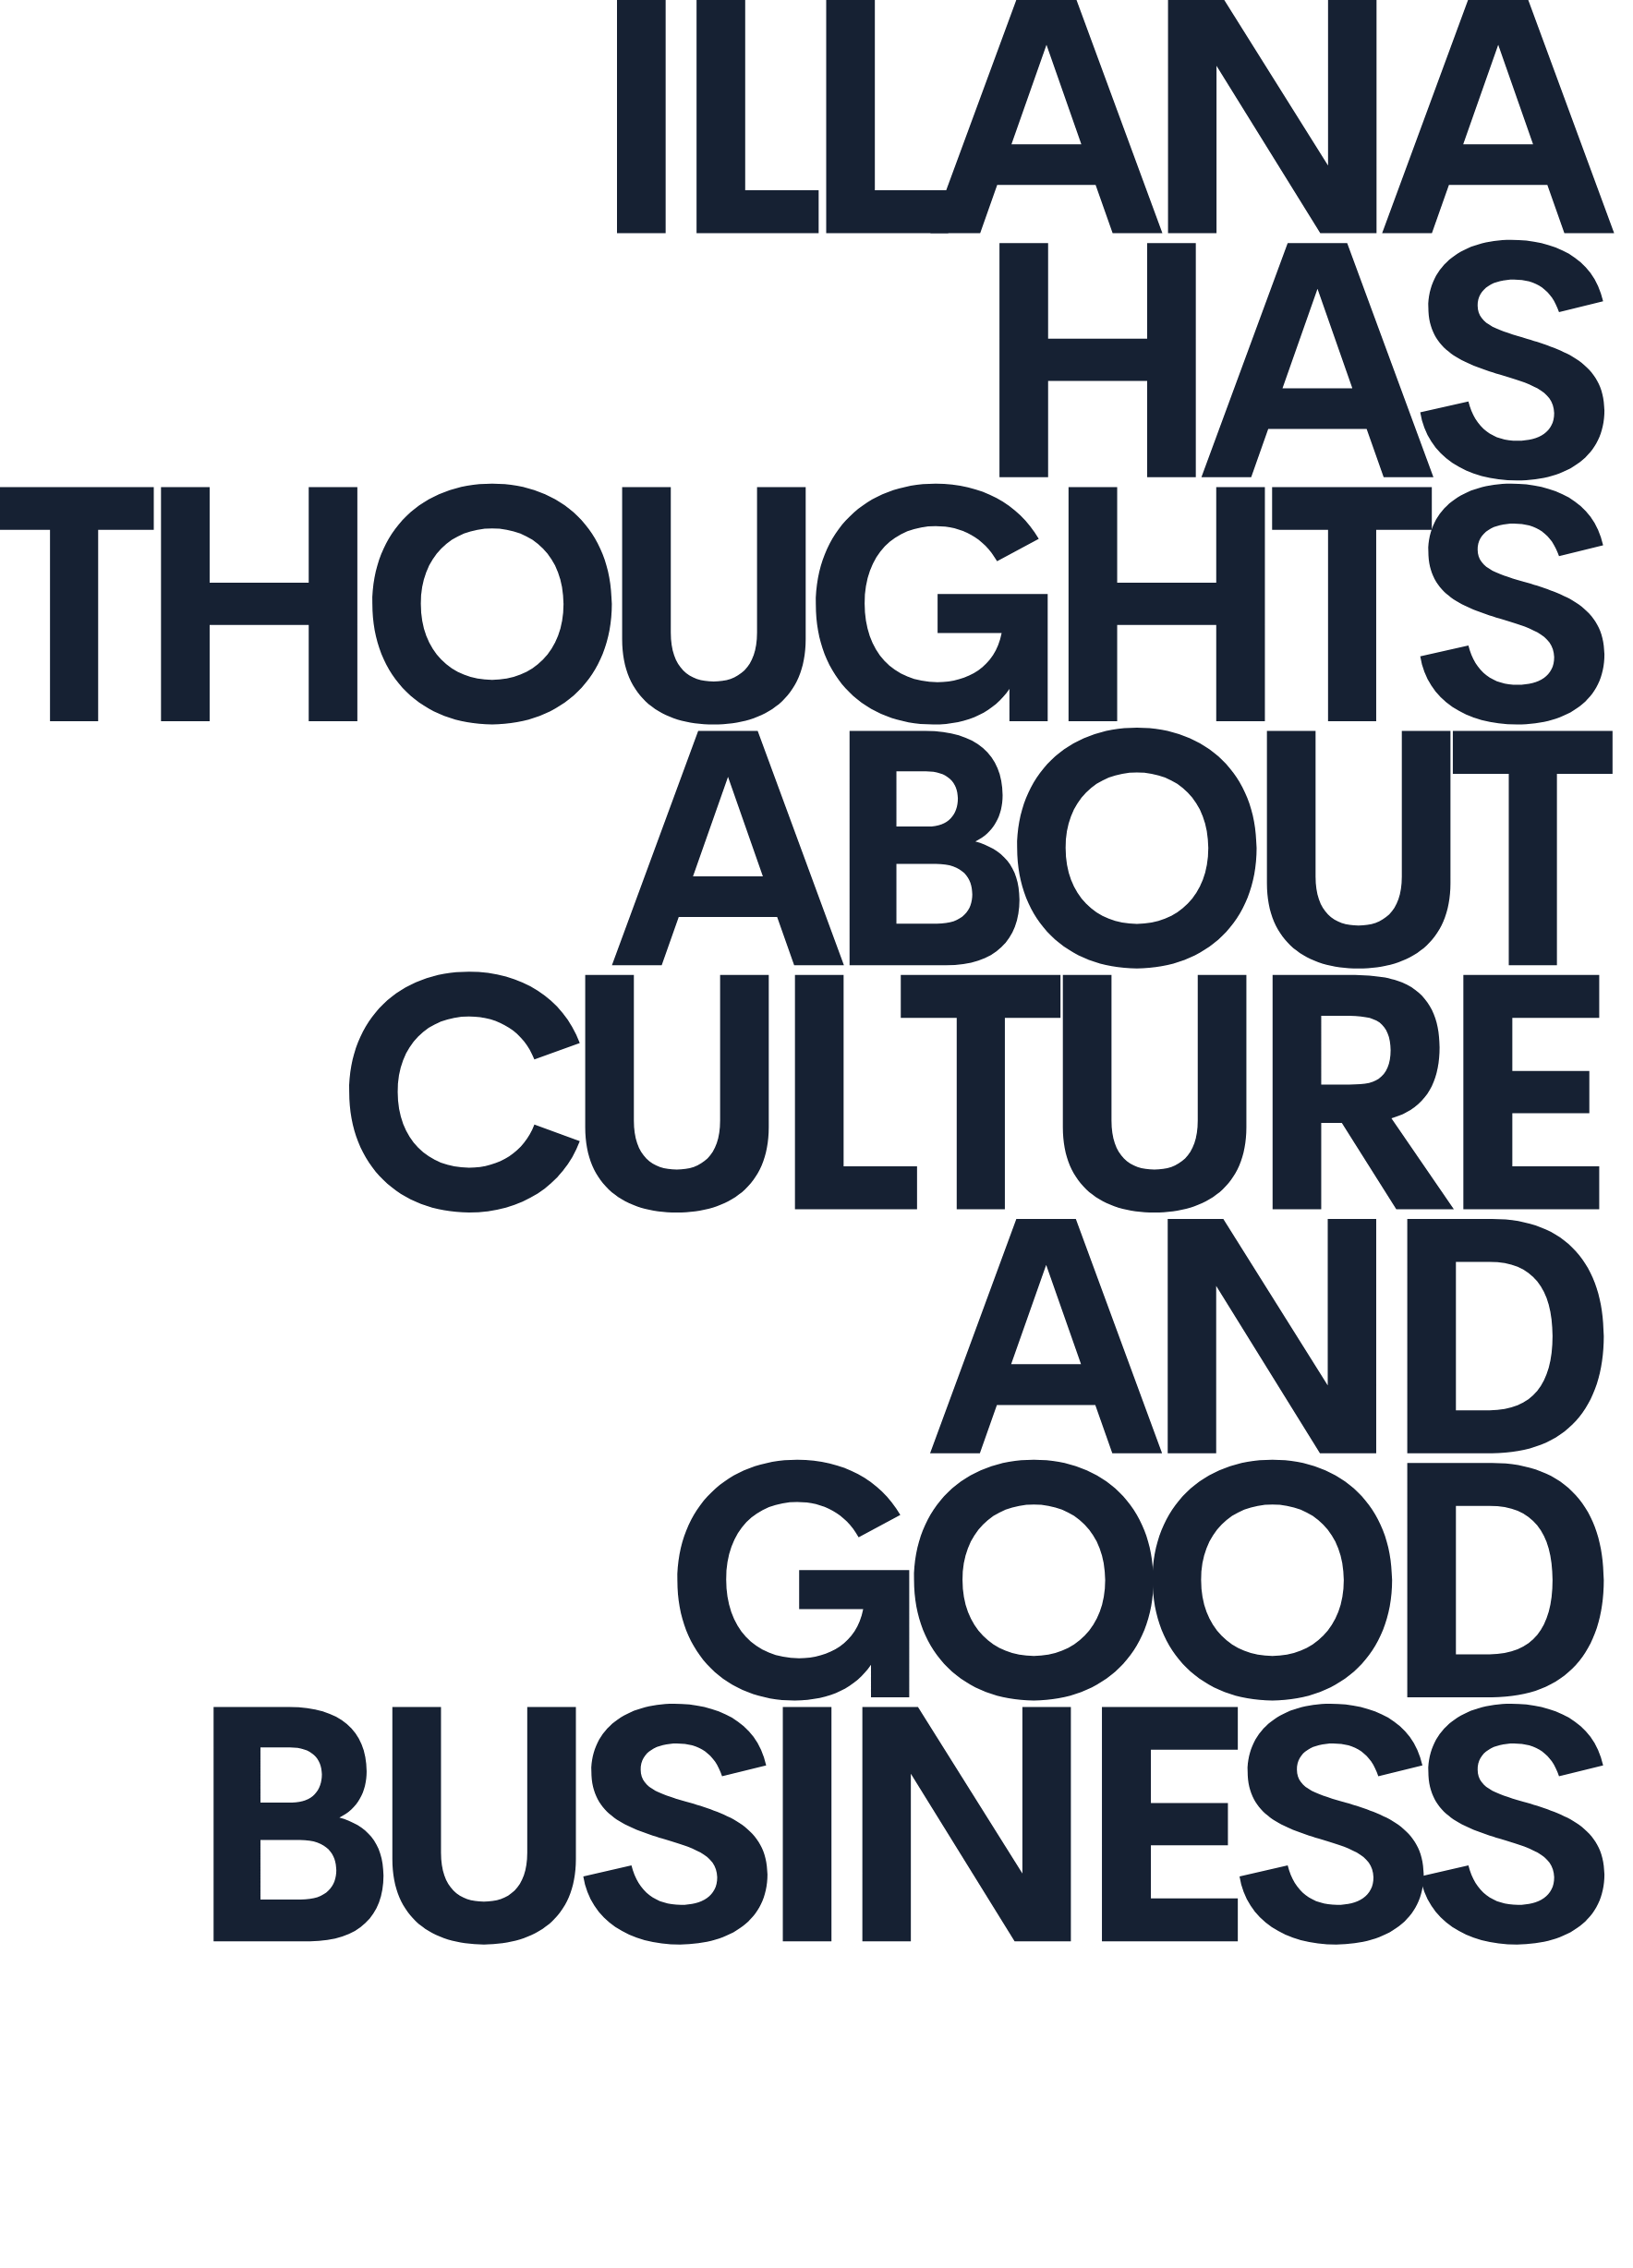 illana has thoughts about culture and good business